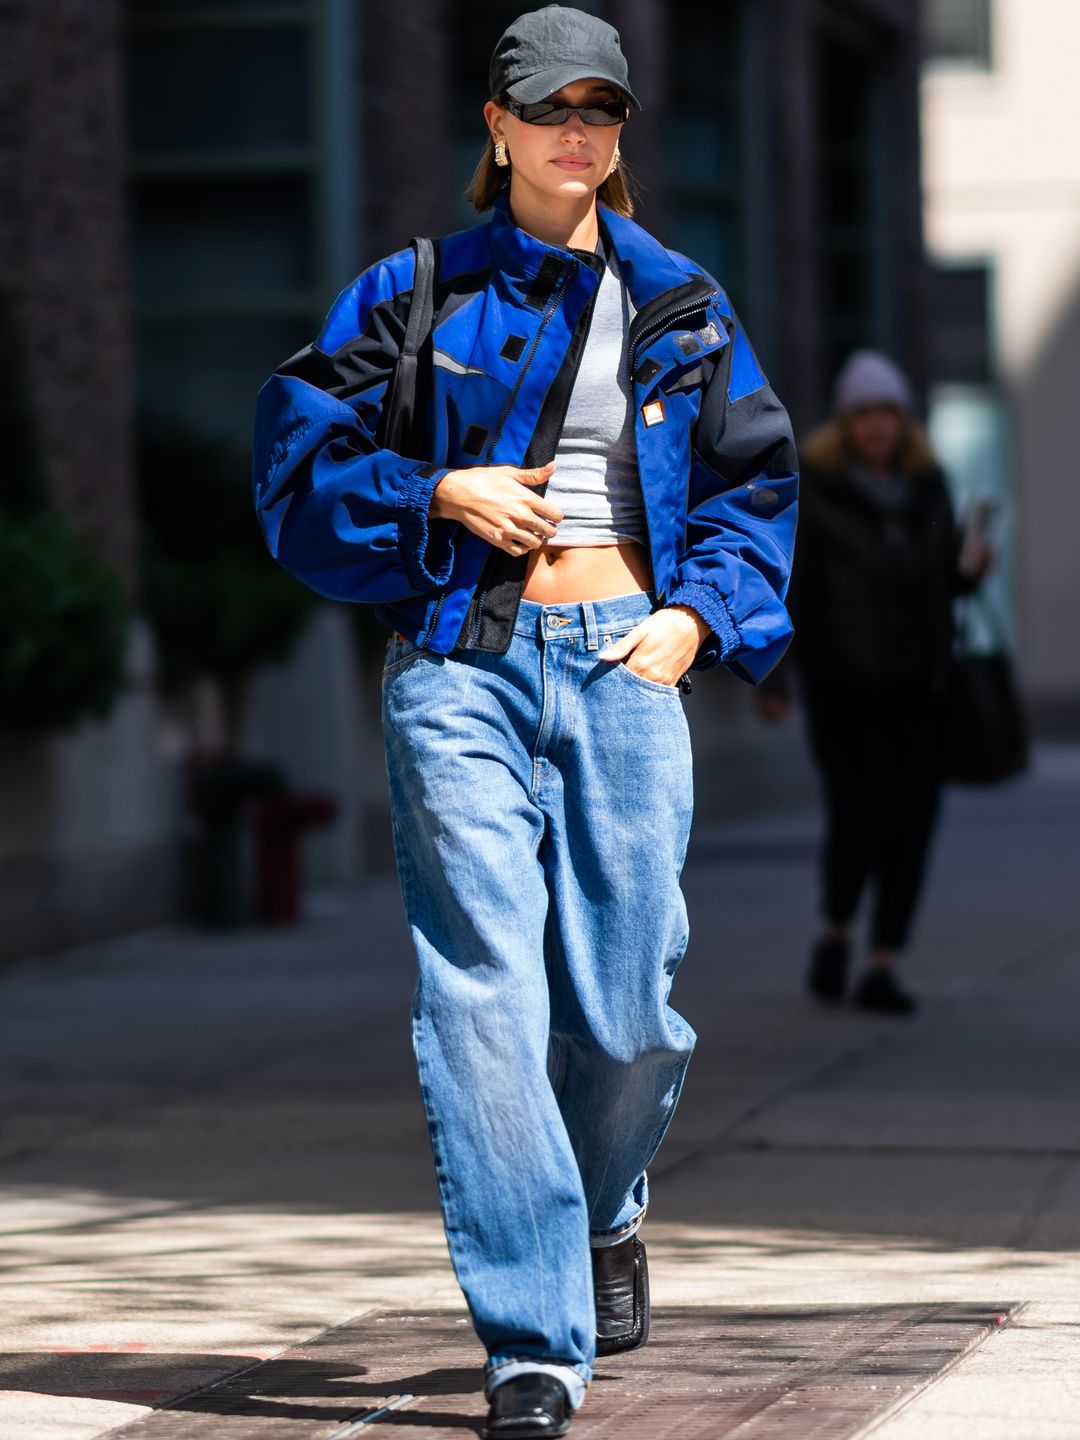 Hailey Bieber is all about the 'Tech Bro' look right now 